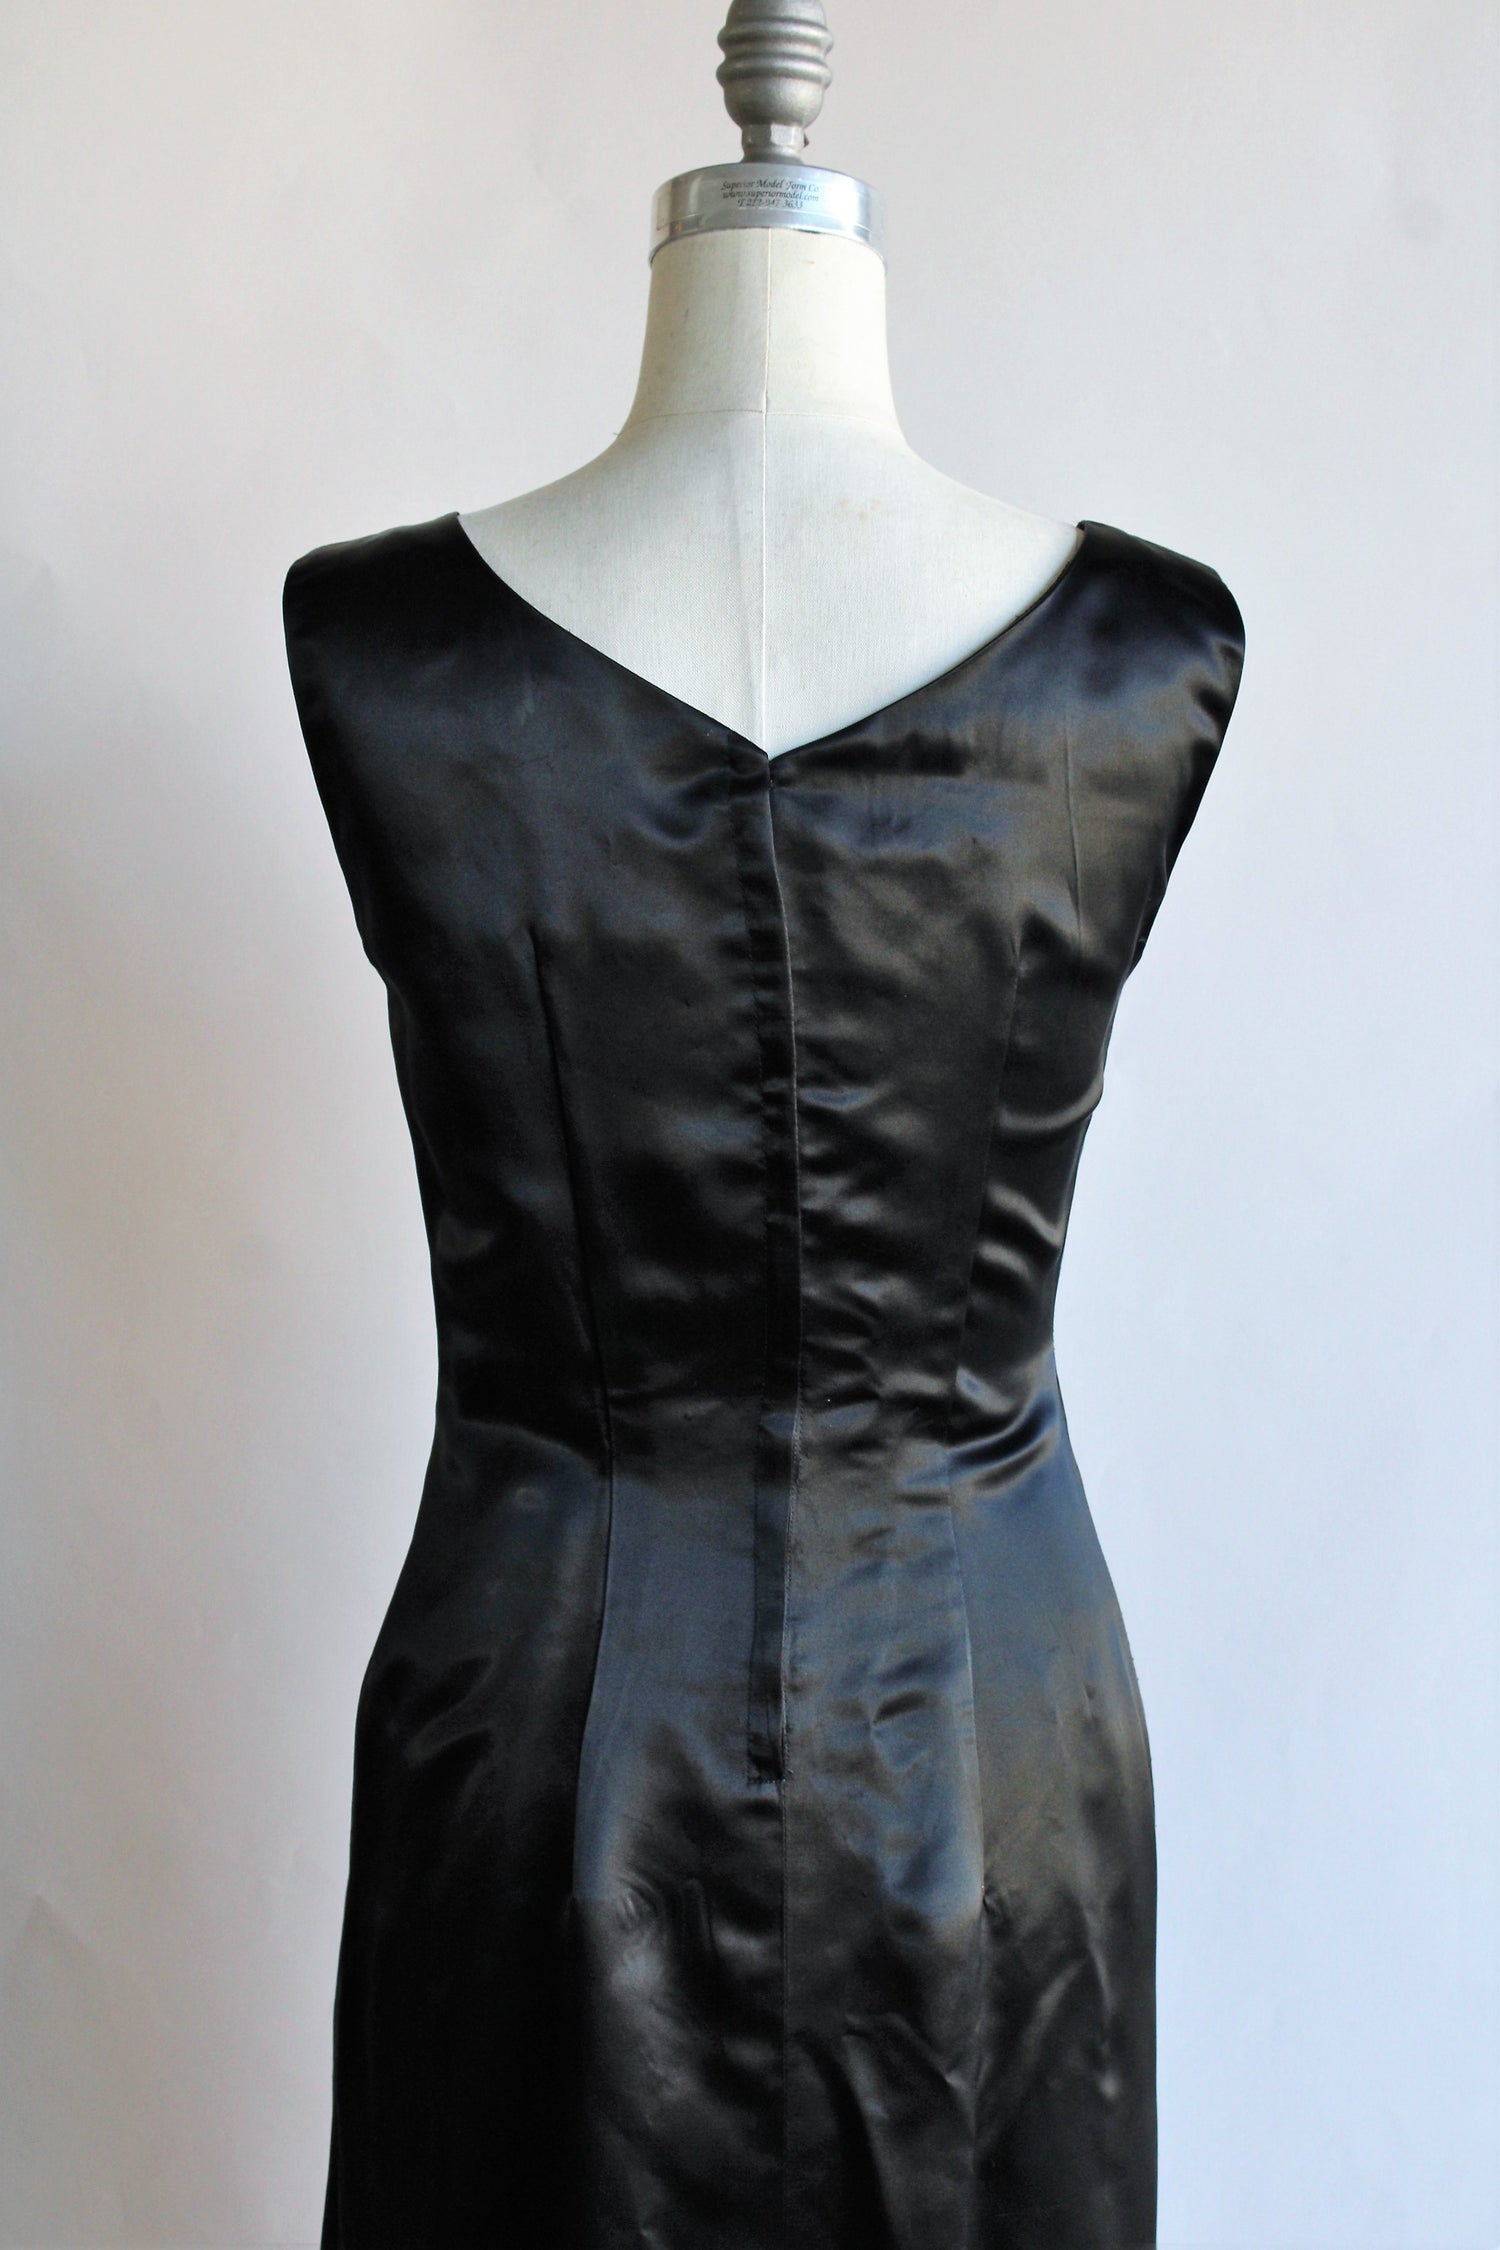 Vintage 1960s Satin Cocktail Dress with Beading